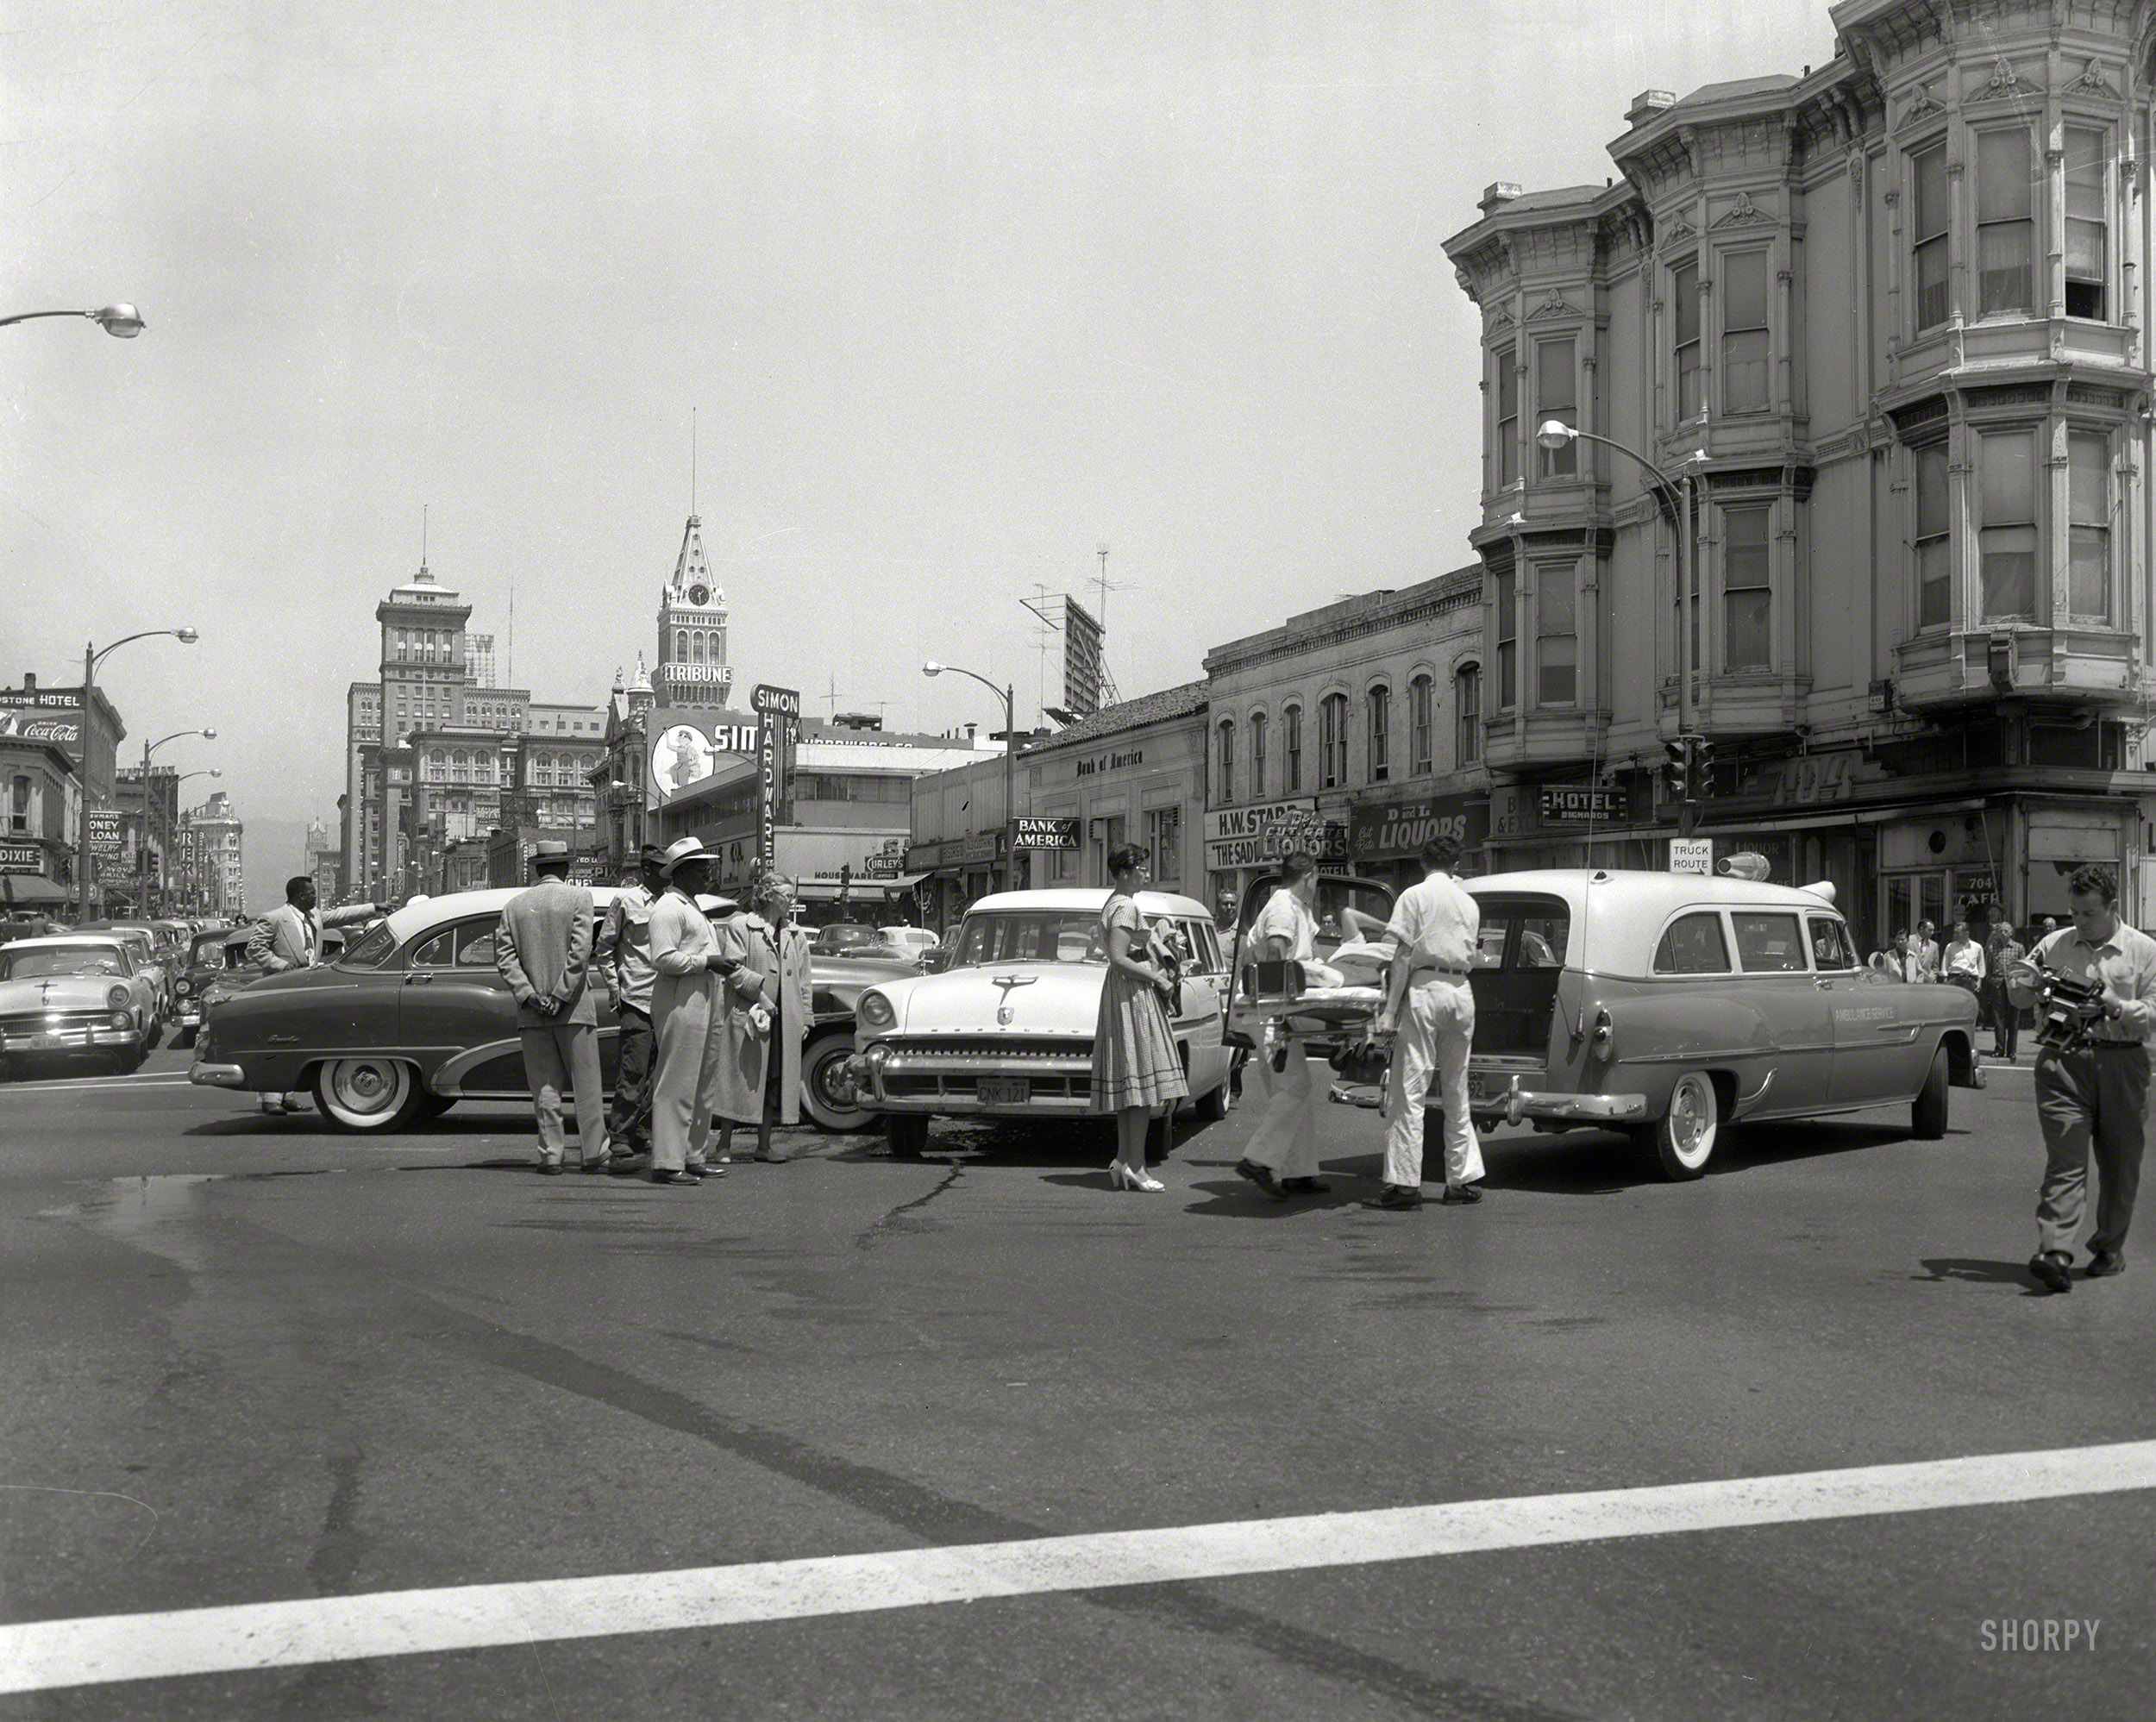 Oakland circa 1957, and another car crash involving an early-1950s Buick. Conven&shy;iently close to the offices of the Oakland Tribune. Not the mention the 704 Cafe and Hotel Richards. 4x5 acetate negative from the News Archive. View full size.
